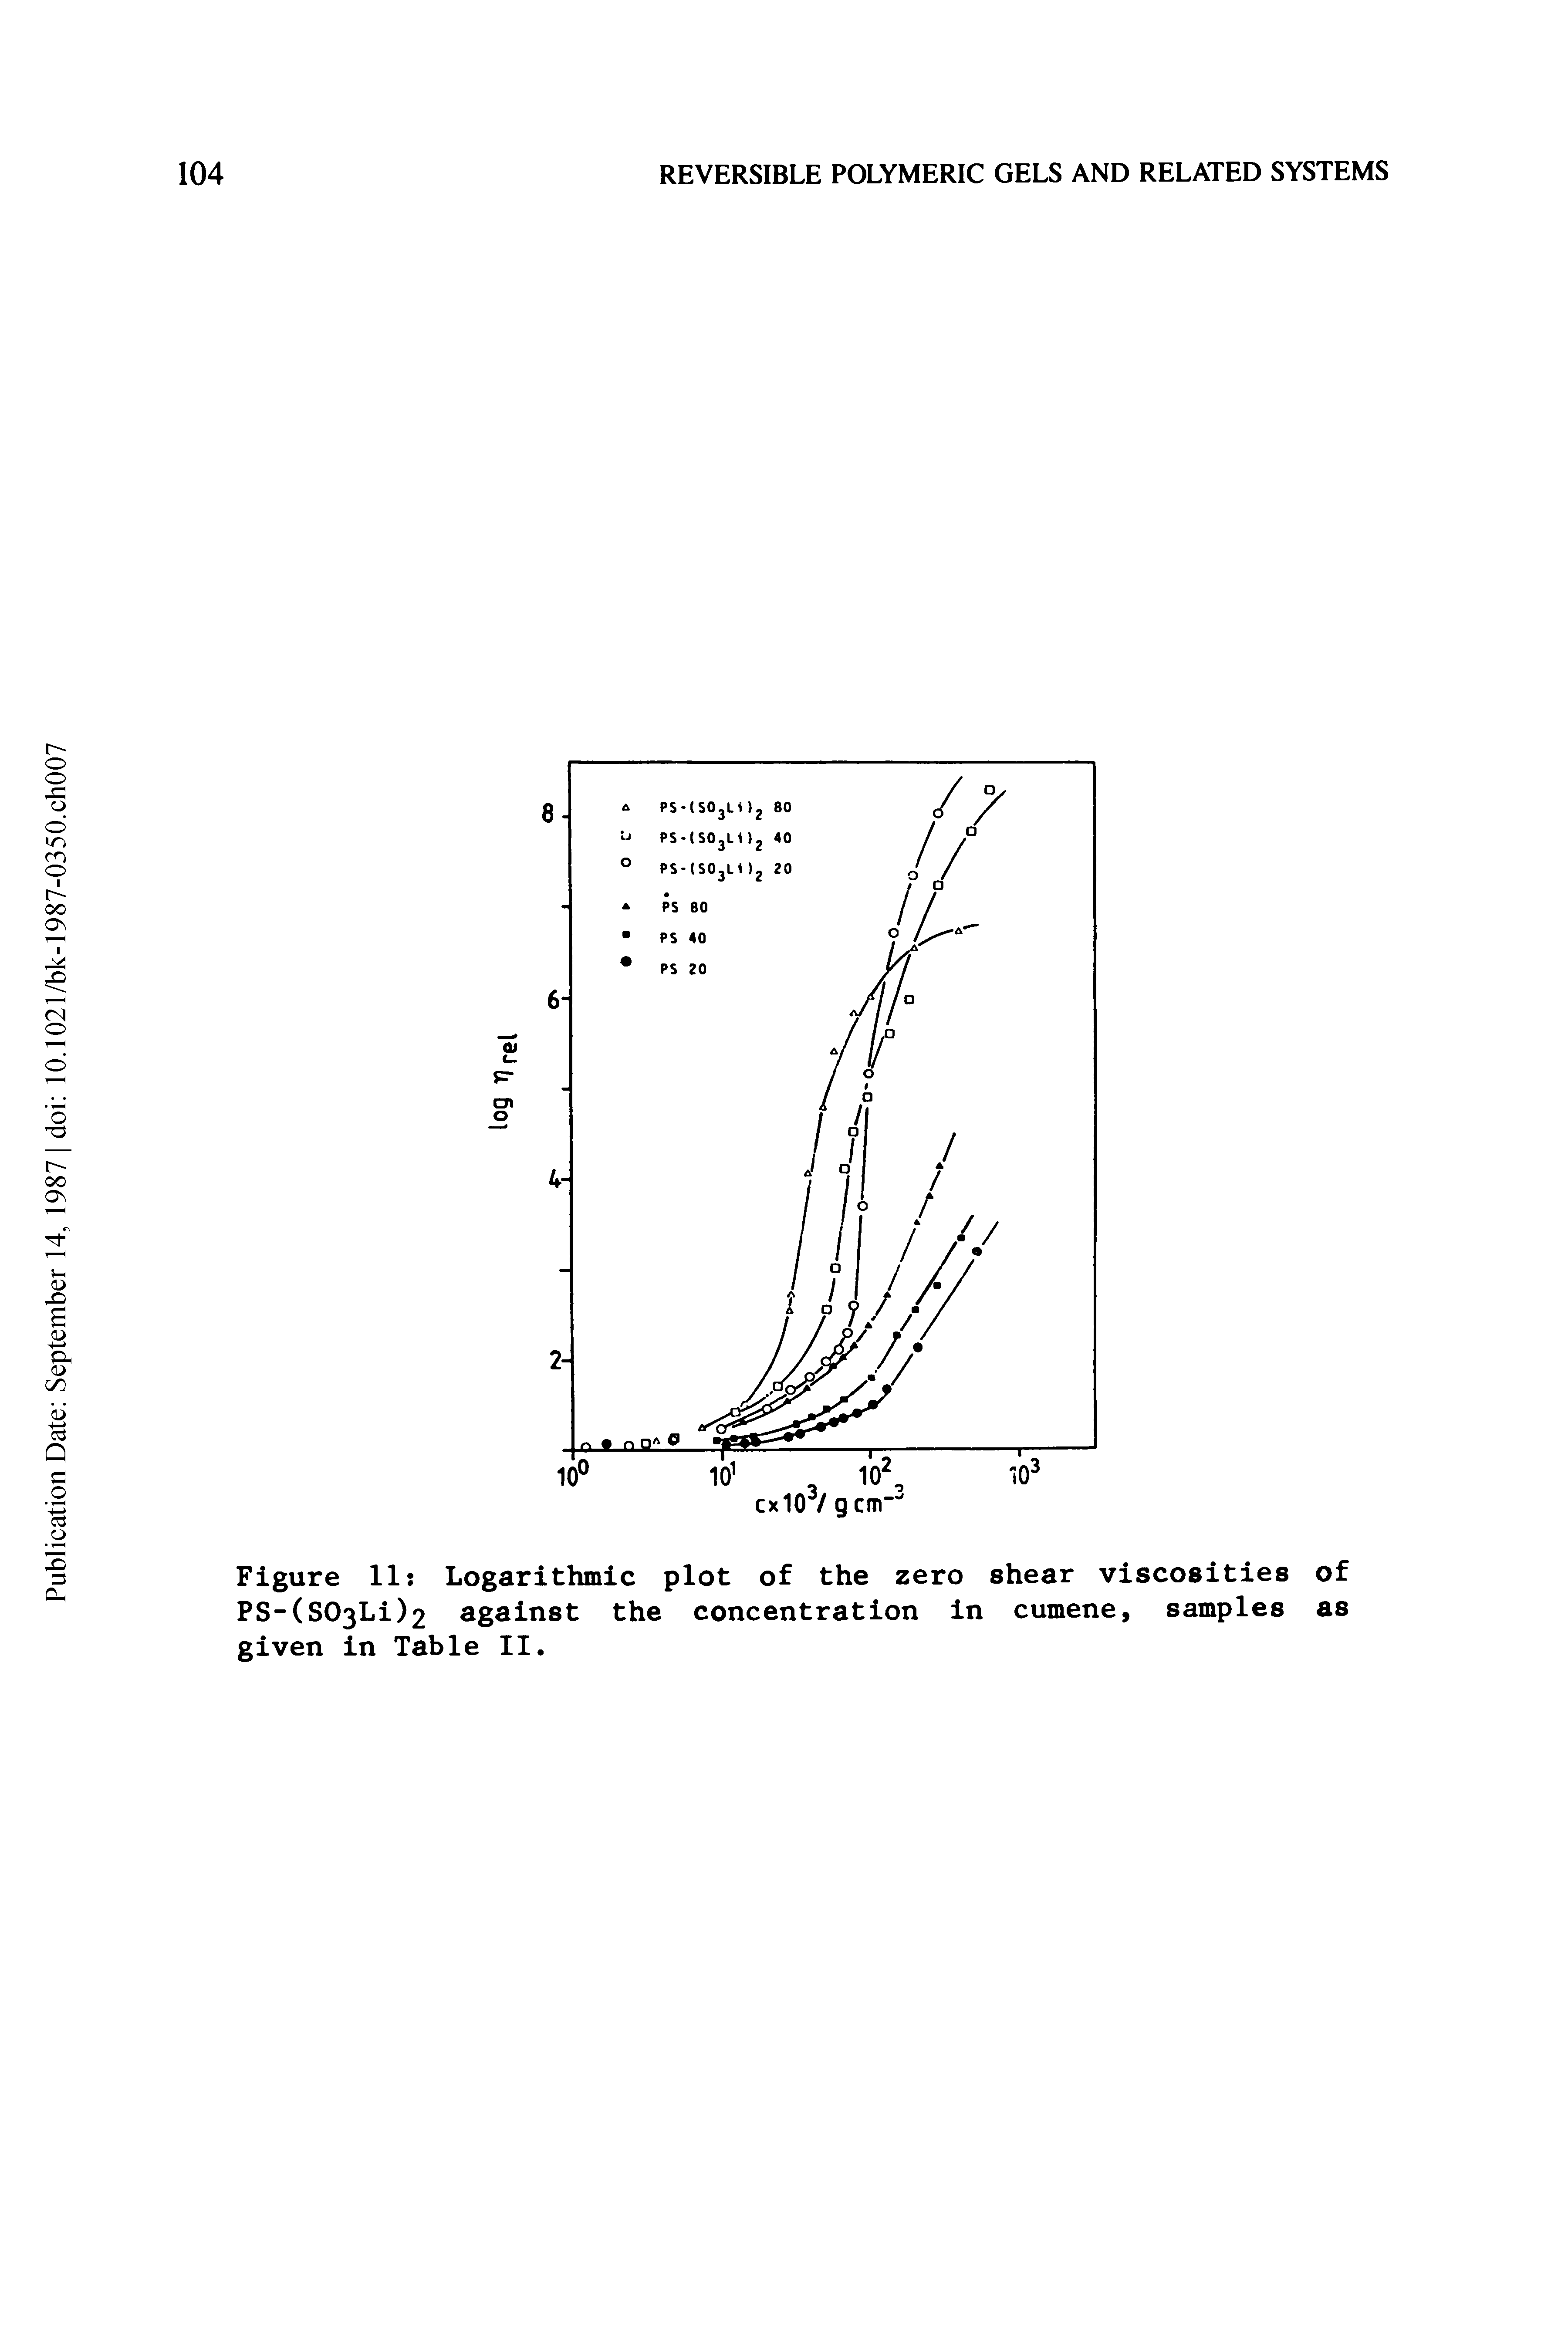 Figure 11 Logarithmic plot of the zero shear viscosities of PS-(S03Li)2 against the concentration in cumene, samples as given in Table II.